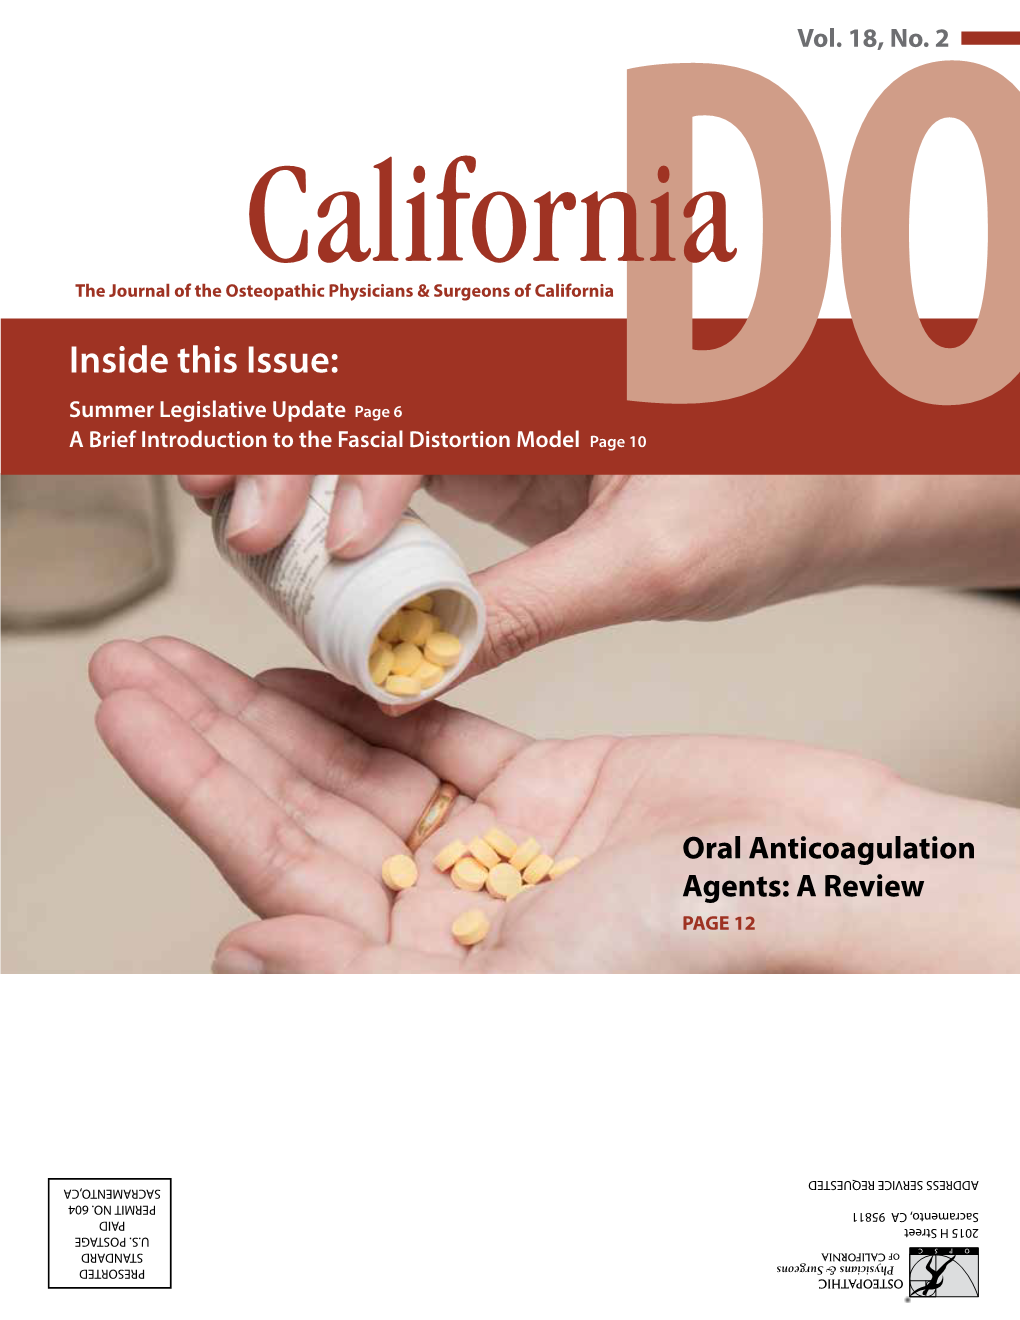 California the Journal of the Osteopathic Physicians & Surgeons of California